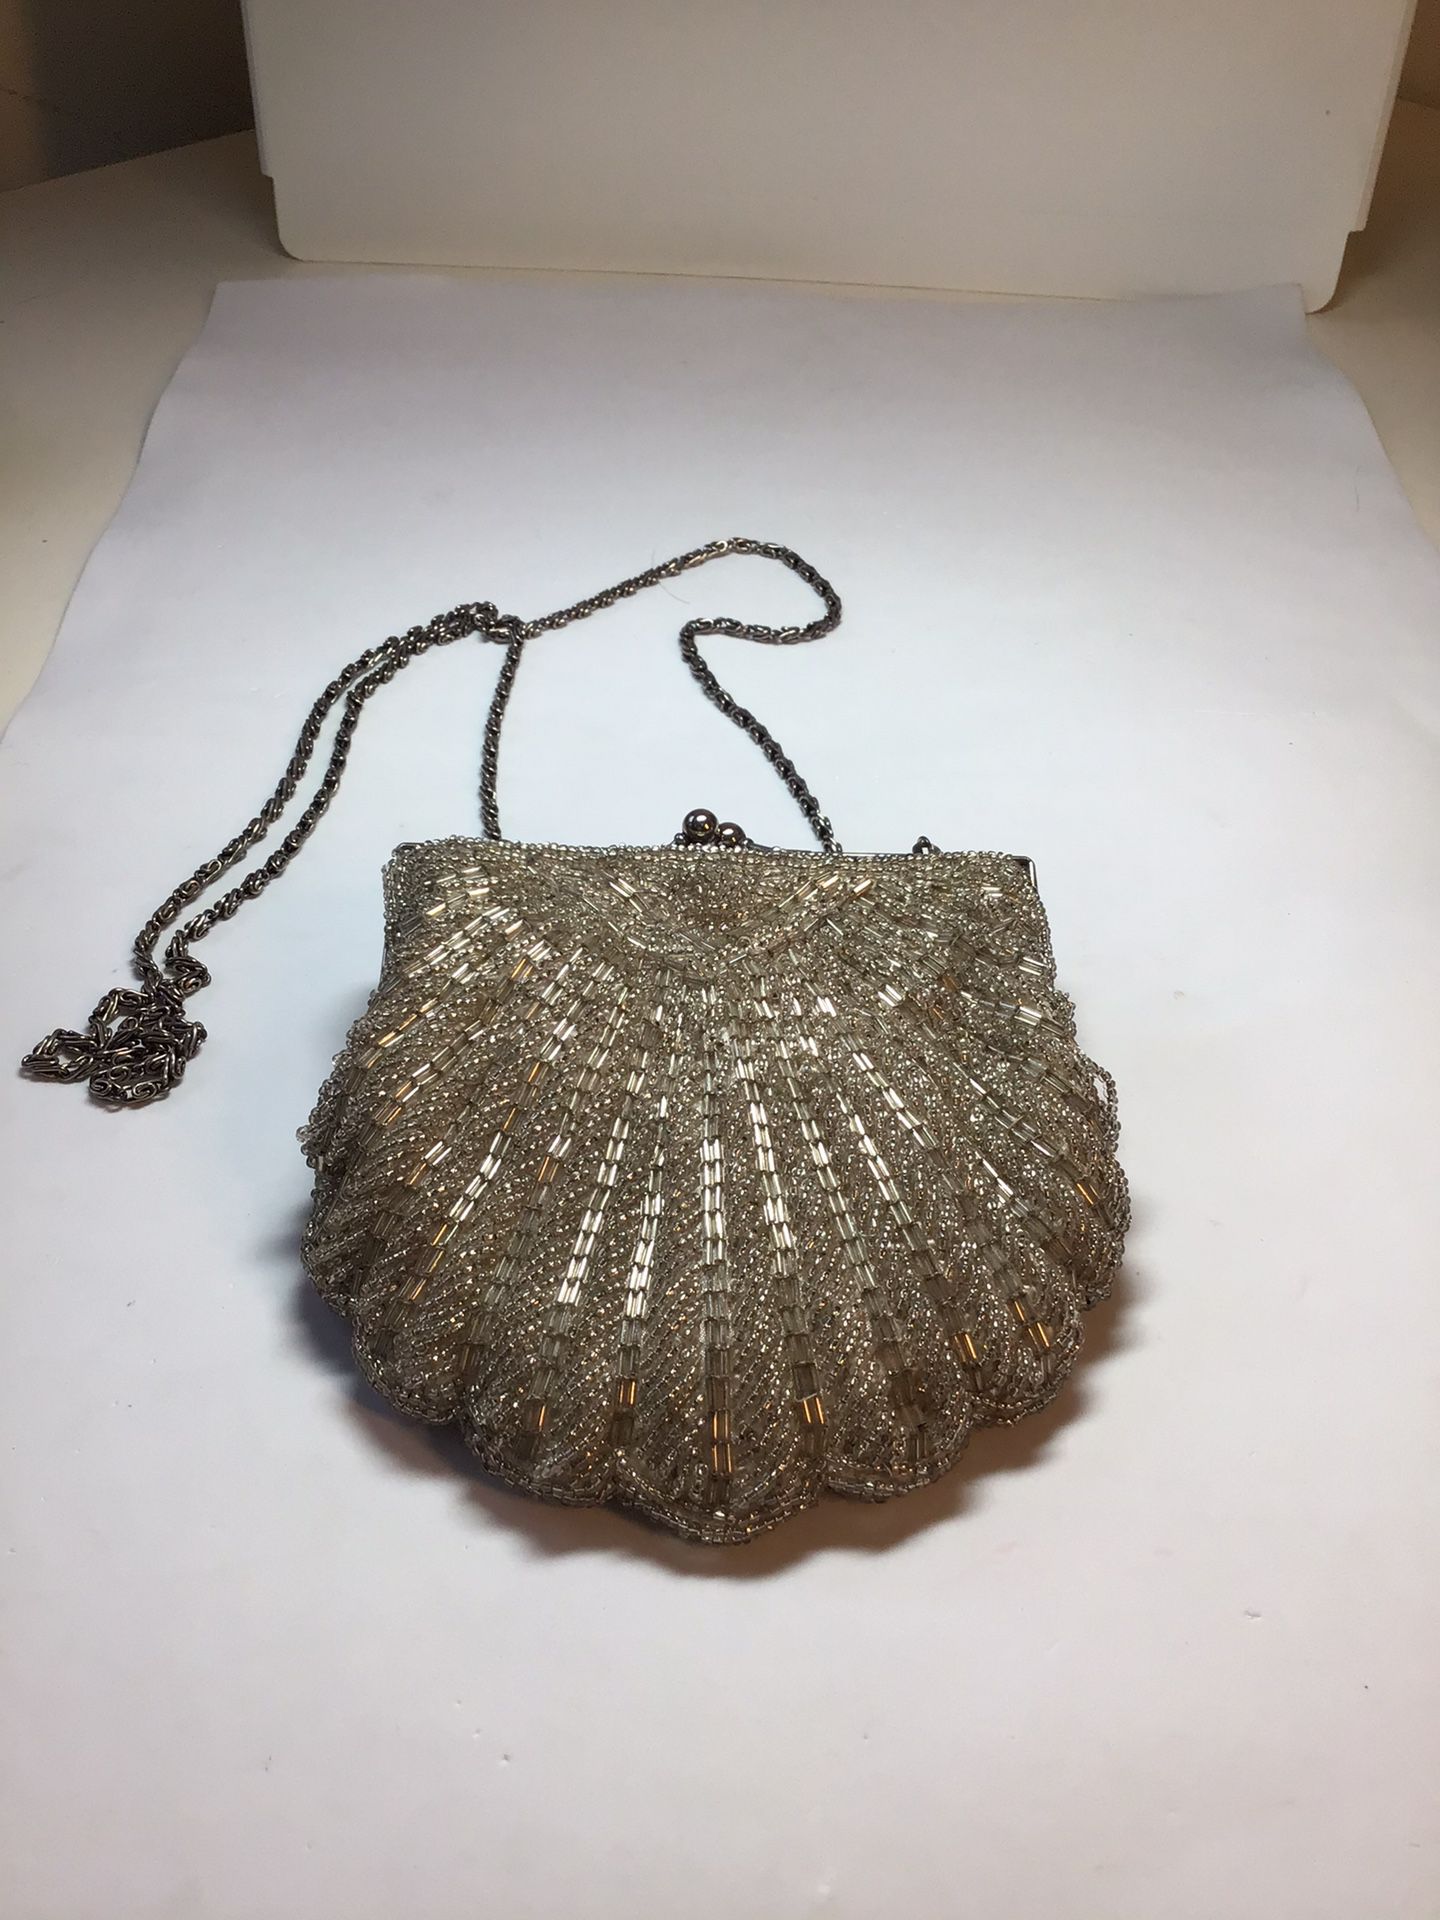 La Regale Vintage Silver Beaded Clam Shell & White Silk Lined Evening Bag  Long Chain Purse for Sale in Oakland Park, FL - OfferUp